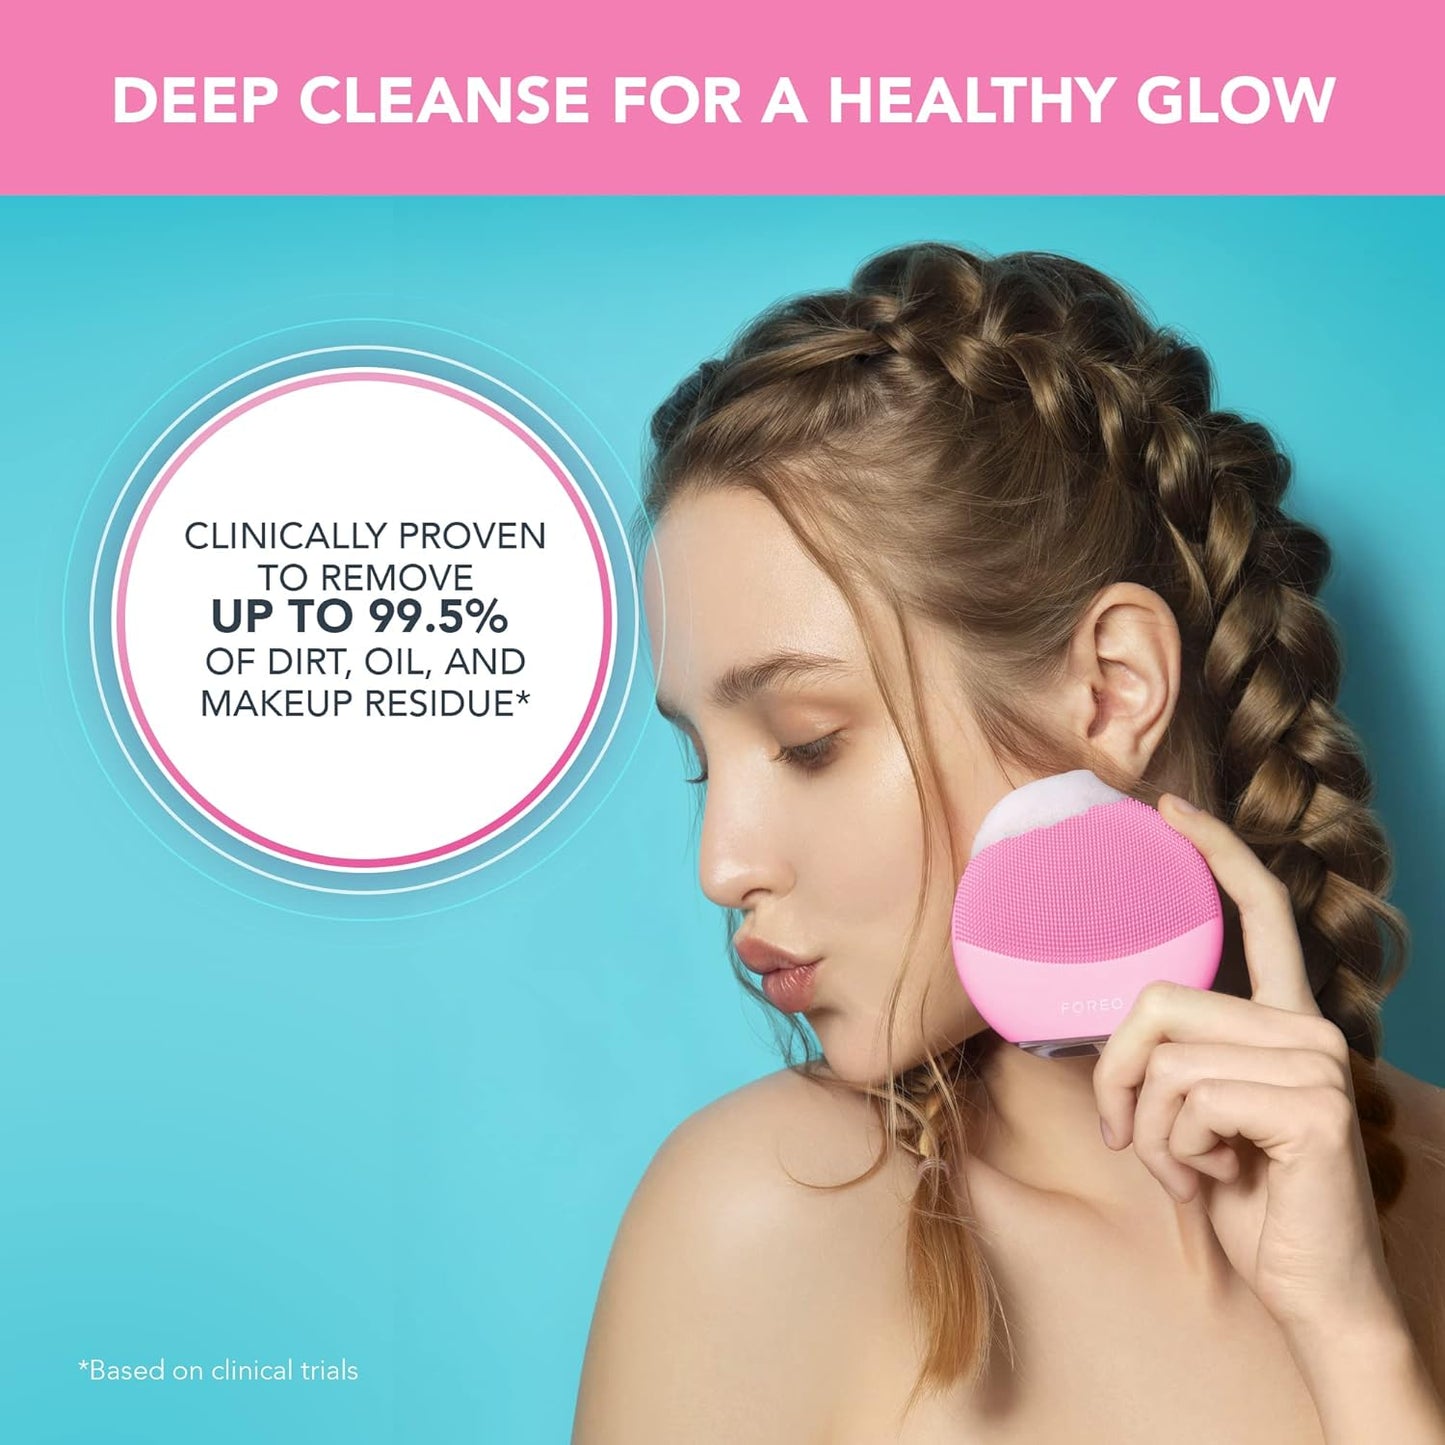 Load image into Gallery viewer, Foreo Luna Mini 3 Facial Cleansing Brush - Travel Accessories - Face Massager Electric, Ultra-Hygienic Silicone - Simple Face Wash - Electric Face Cleanser - App-Connected - Pearl Pink
